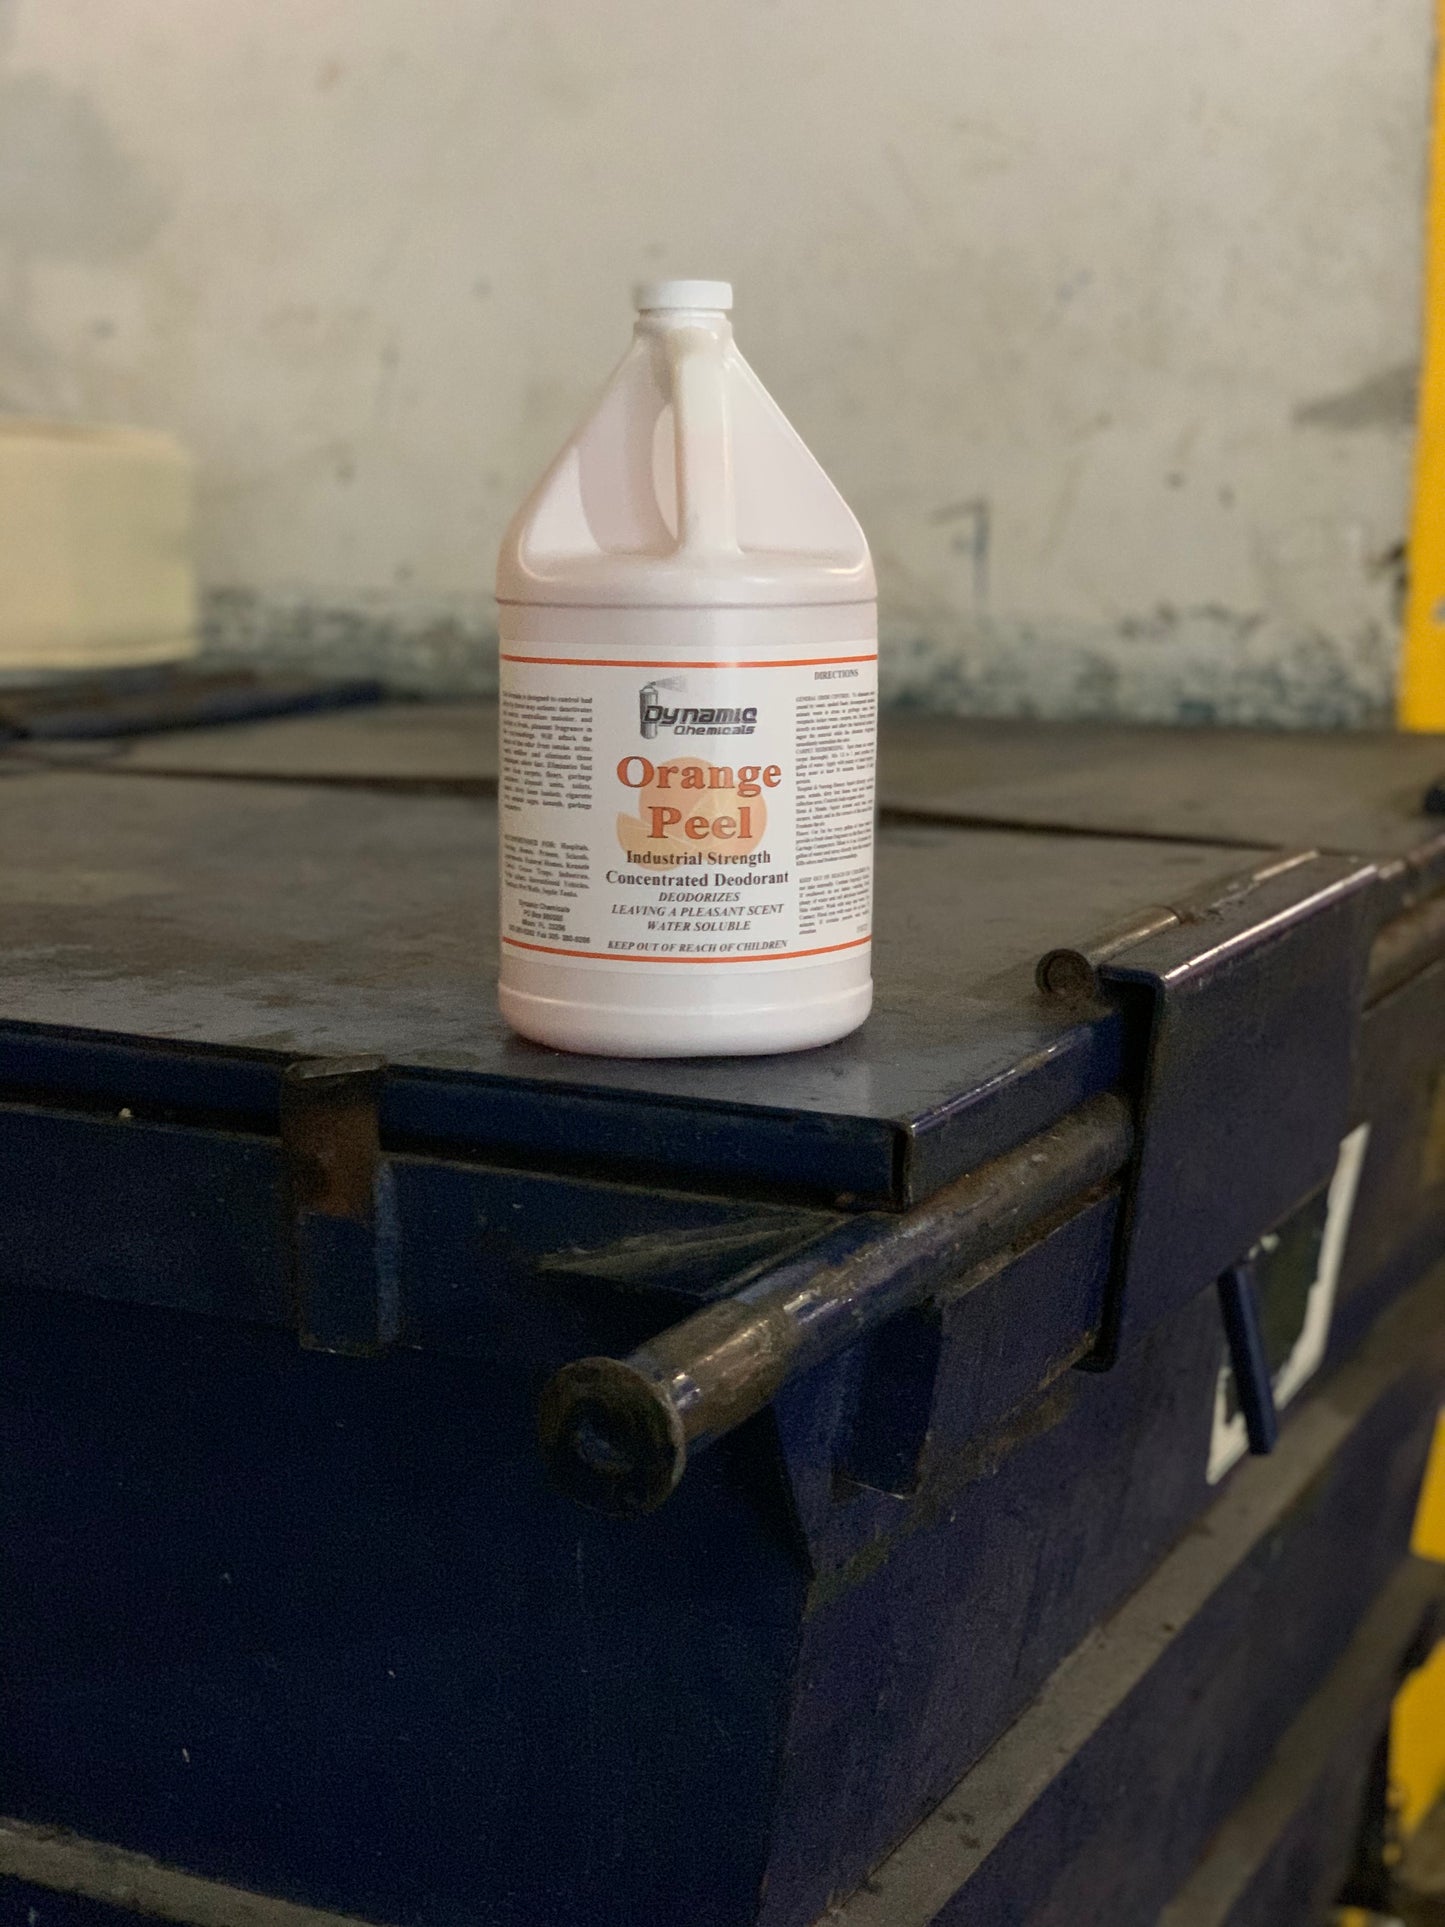 ORANGE PEEL INDUSTRIAL STRENGTH CONCENTRATED  DEGREASER  & DEODORIZER  (ORANGE COLOR) (5 GAL PAIL)